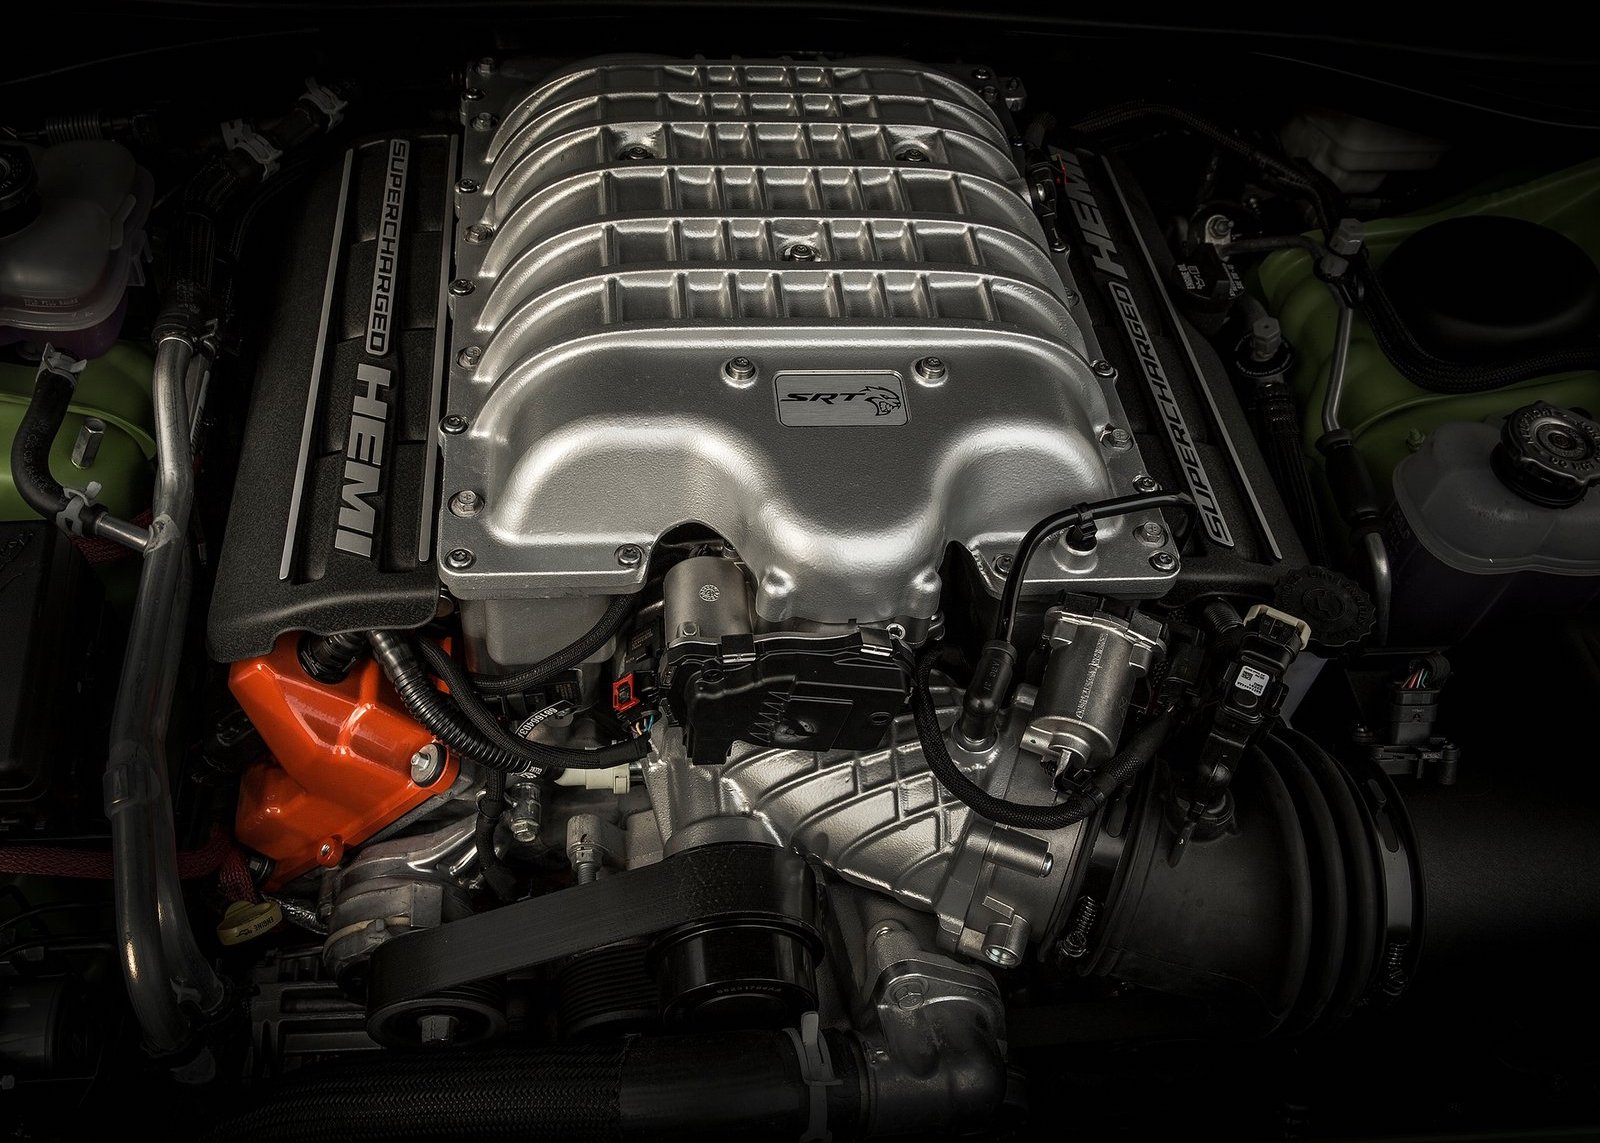 A supercharged 6.2-liter Hellcat HEMI® high-output V-8. It boasts 797 horsepower and 707 lb.-ft. of torque